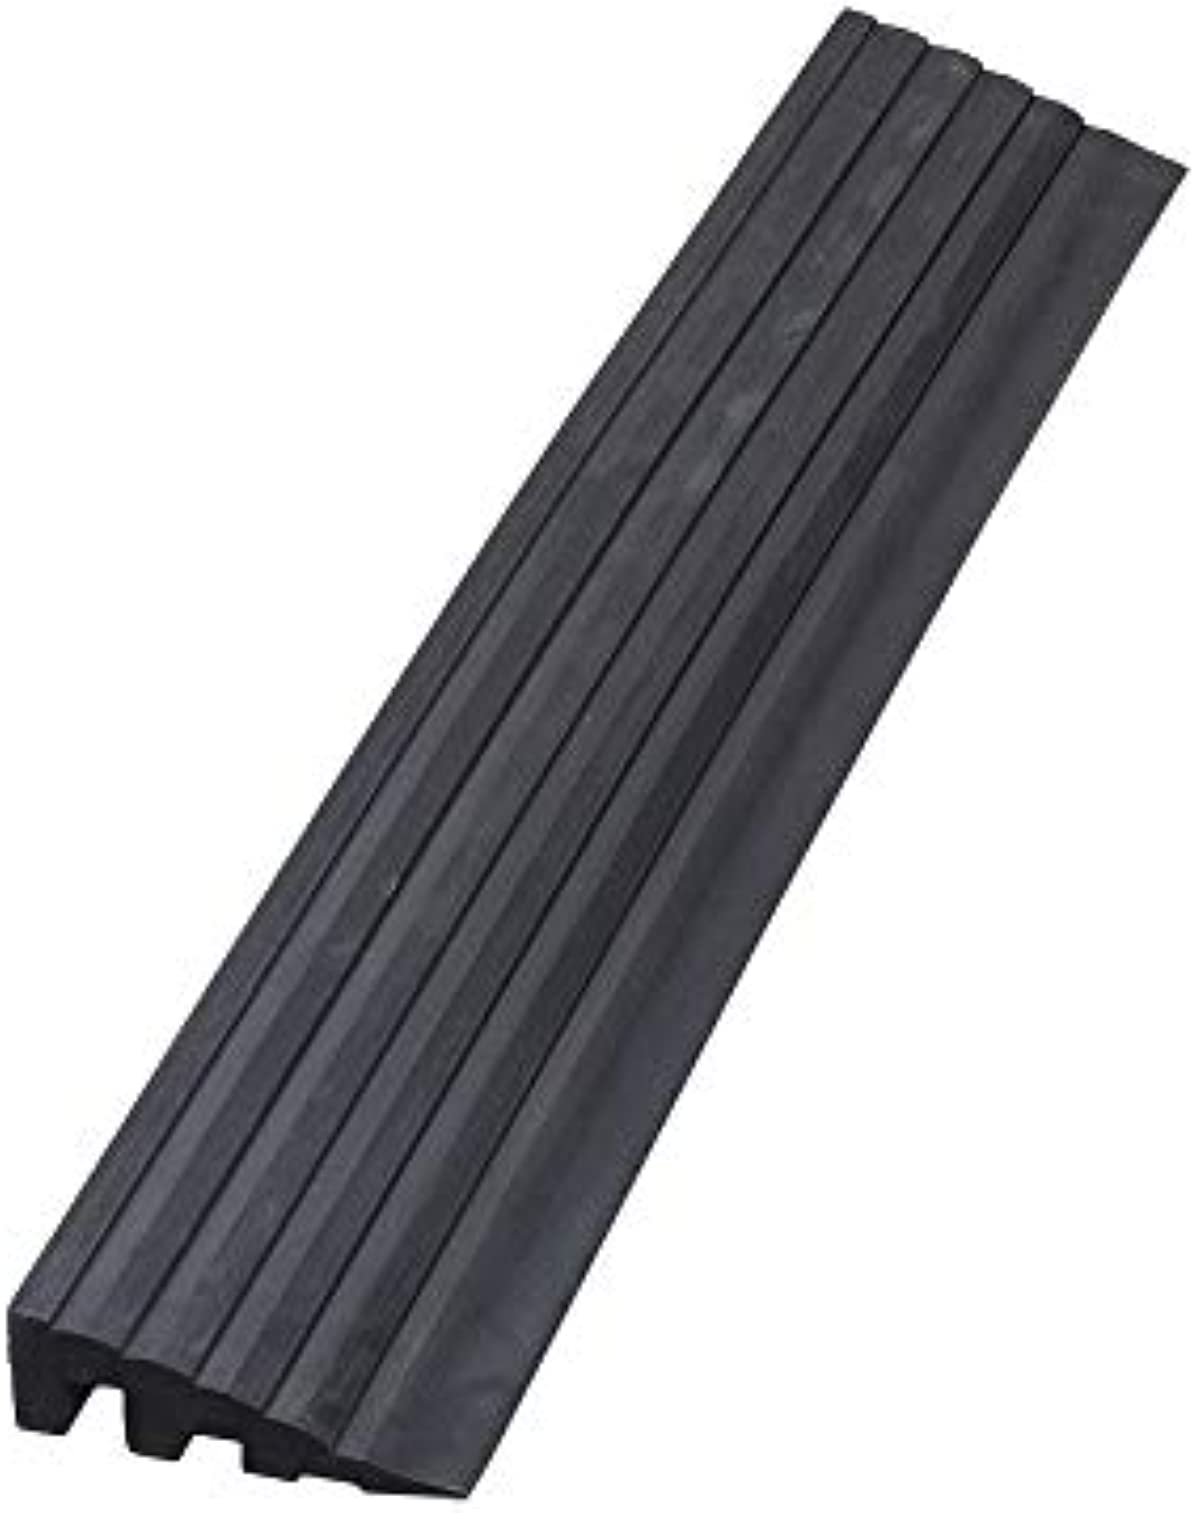 AlveyTech 7/8\" Rubber Threshold Ramp for Self-Balancing Hoverboards, Power Chairs, and Mobility Scooters